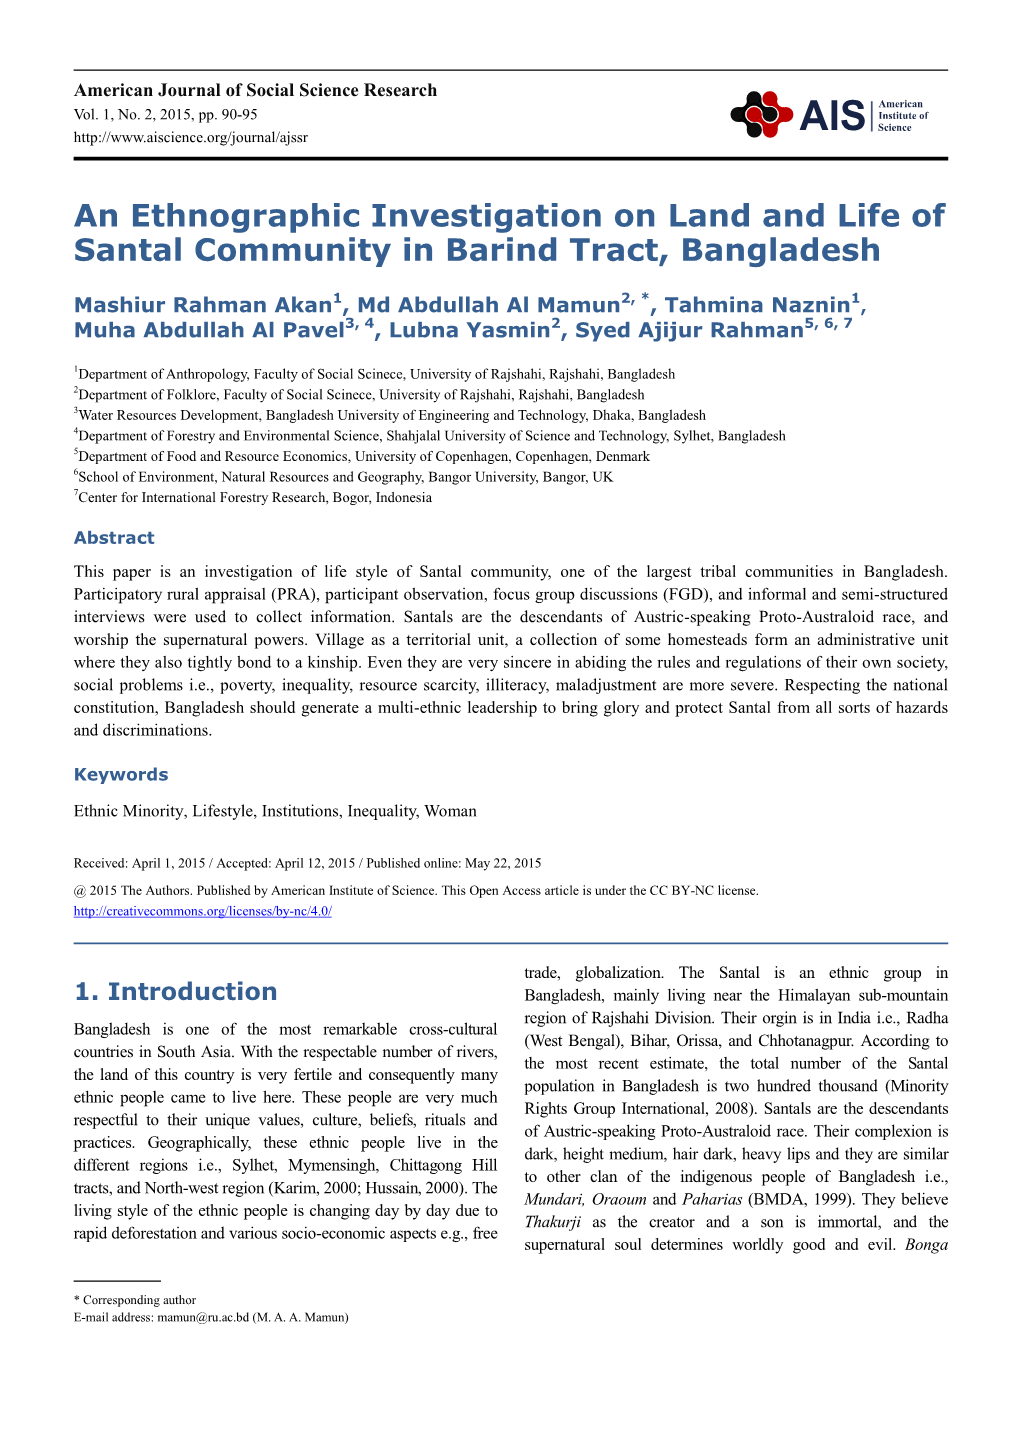 An Ethnographic Investigation on Land and Life of Santal Community in Barind Tract, Bangladesh